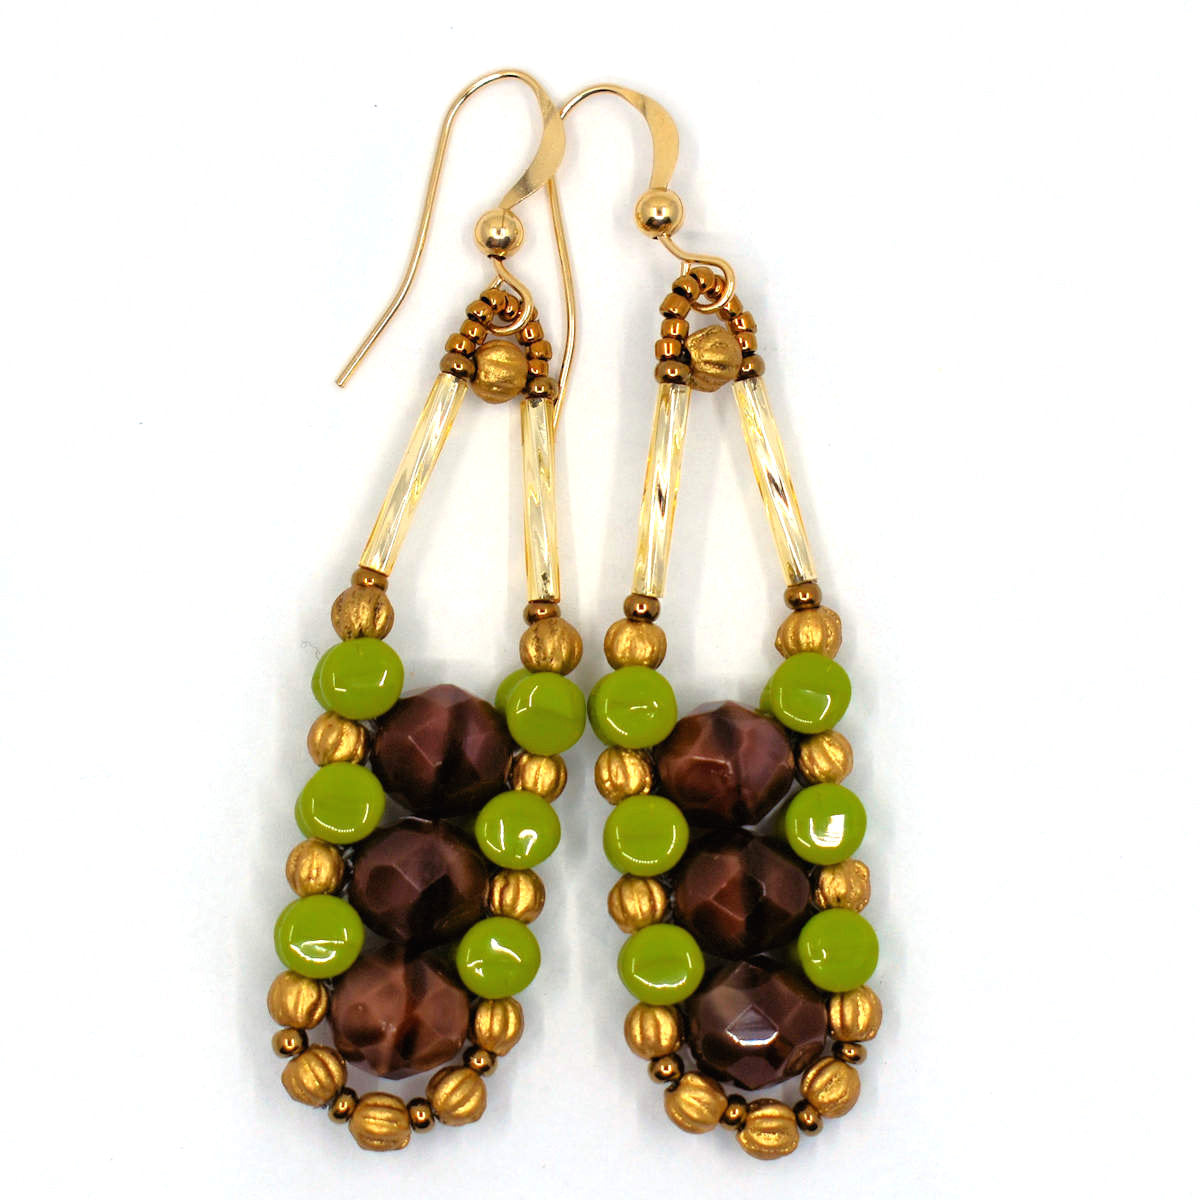 Silky brown and avocado green earrings with gold accents and earwires. These have three silk-swirled brown beads in a column, outlined in green and gold beads.